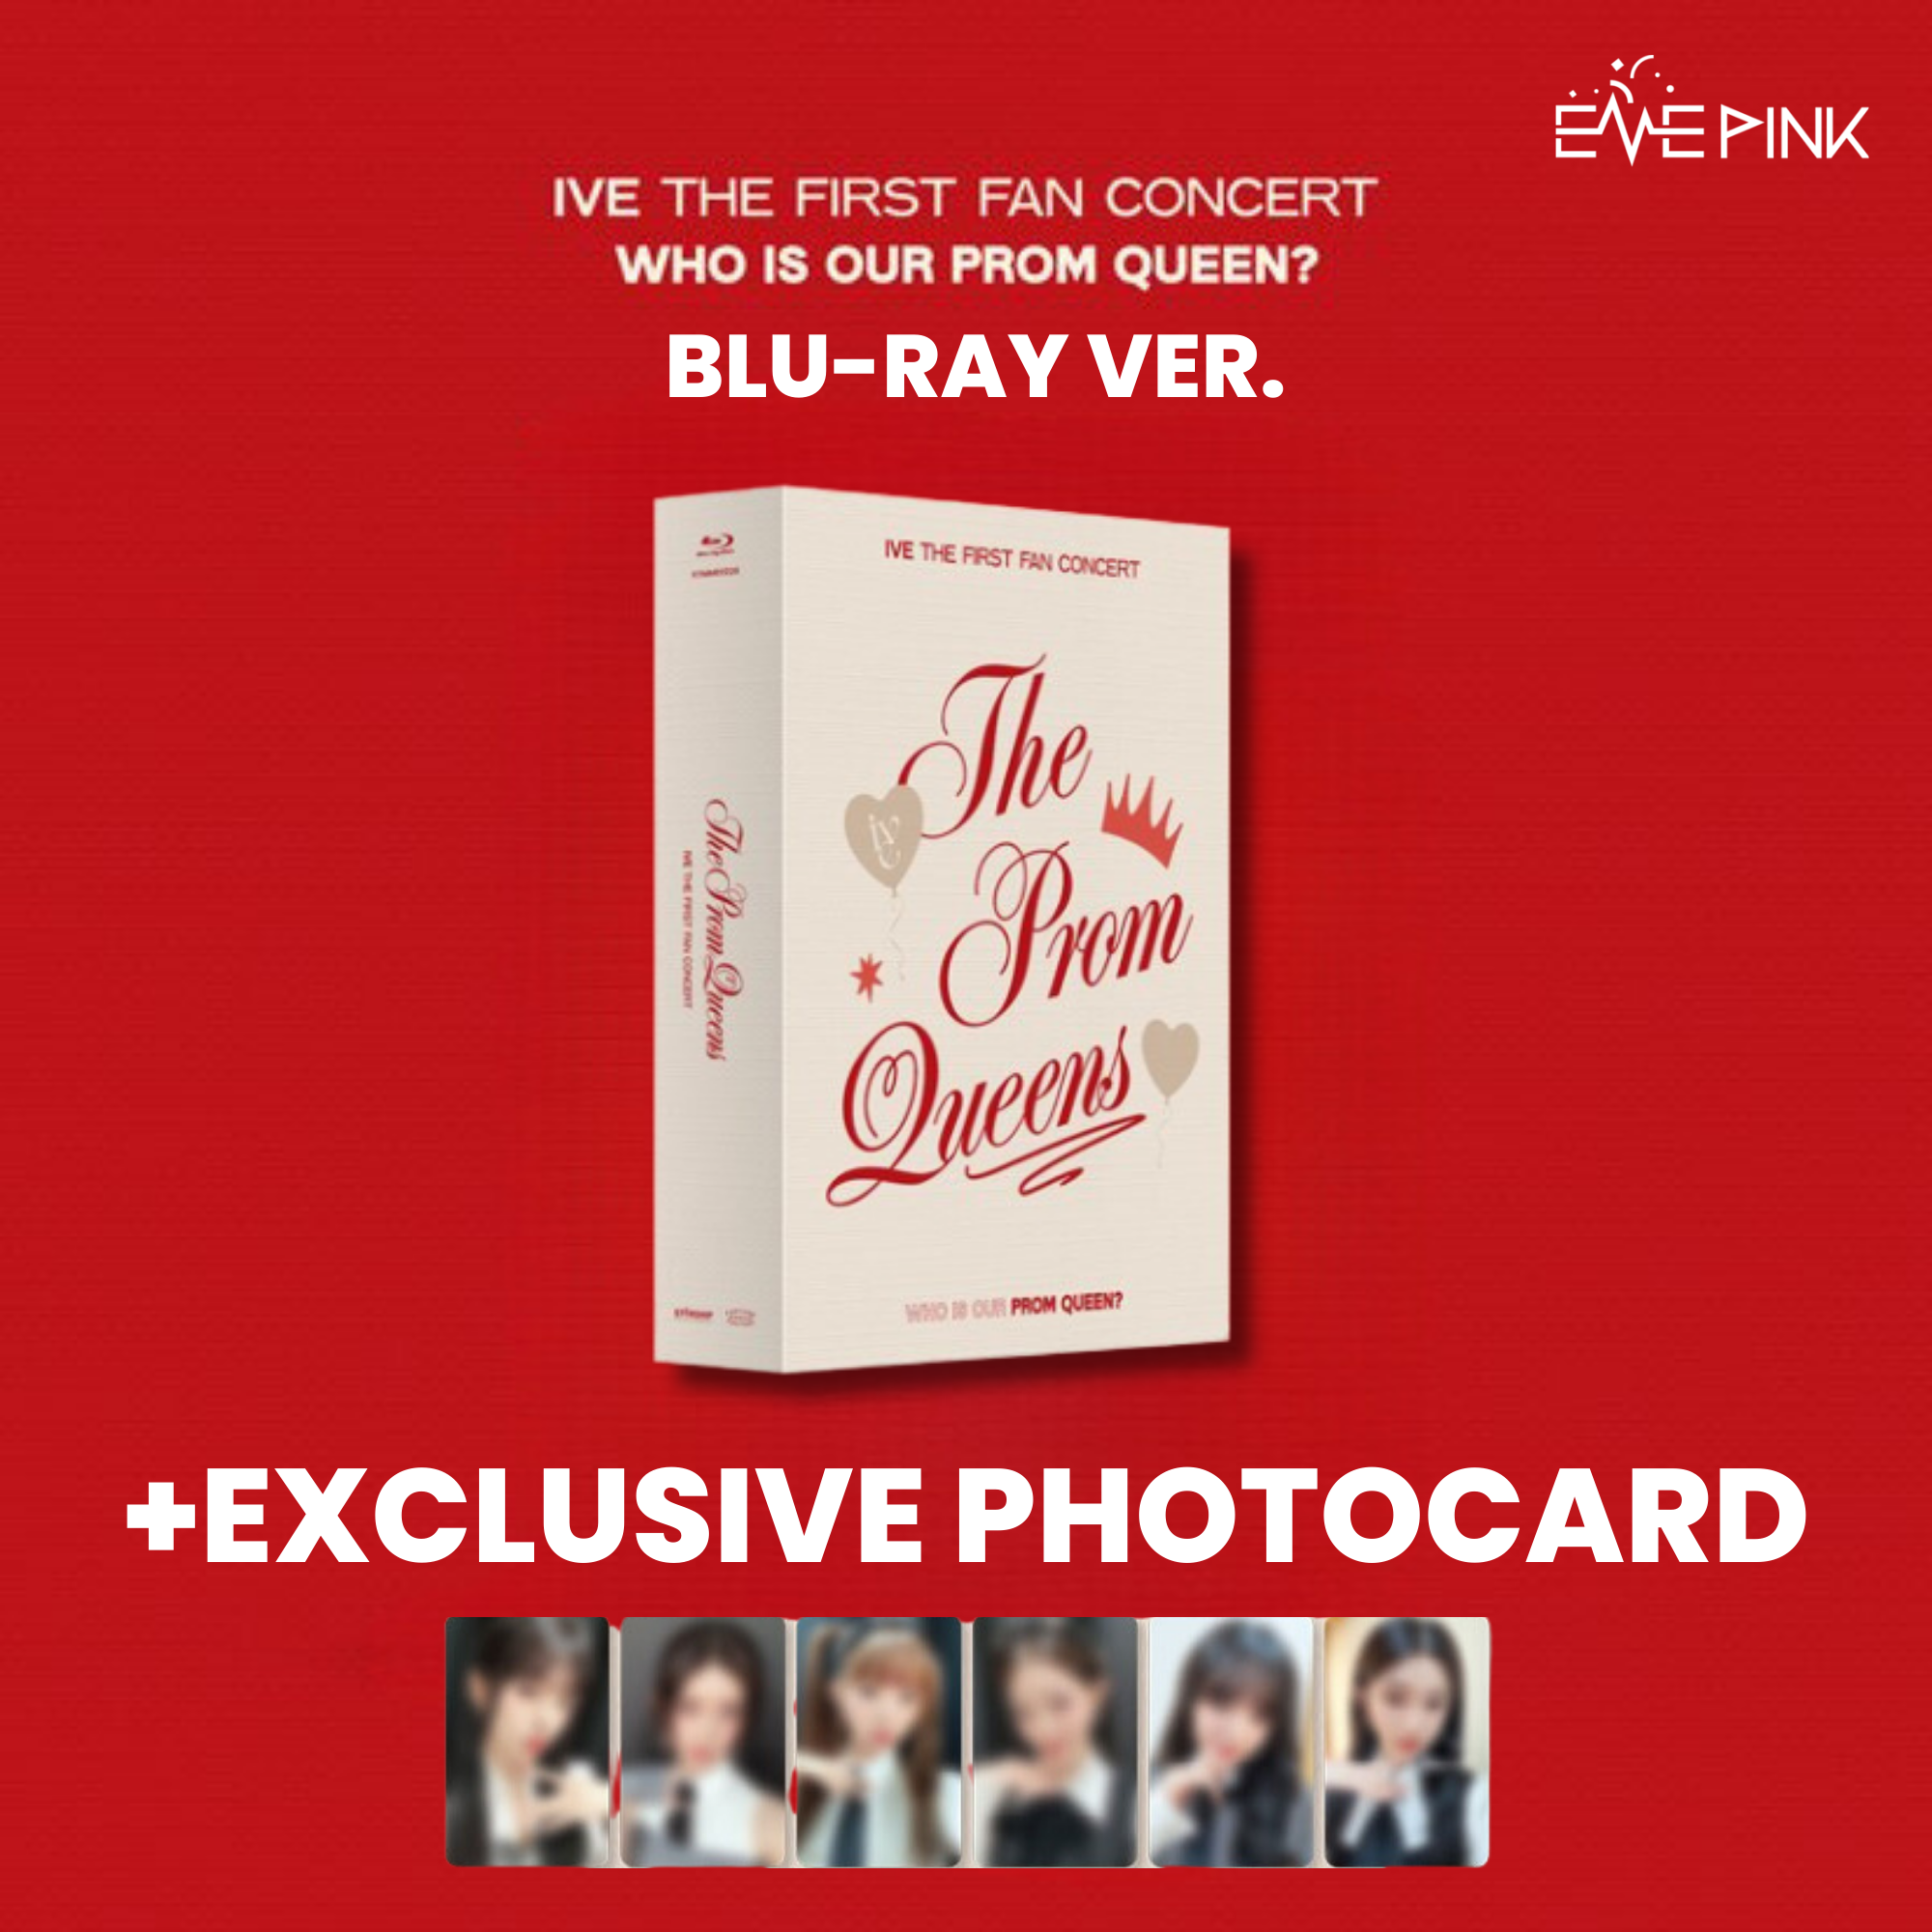 IVE (아이브) - THE FIRST FAN CONCERT [The Prom Queens] (Blu-ray 